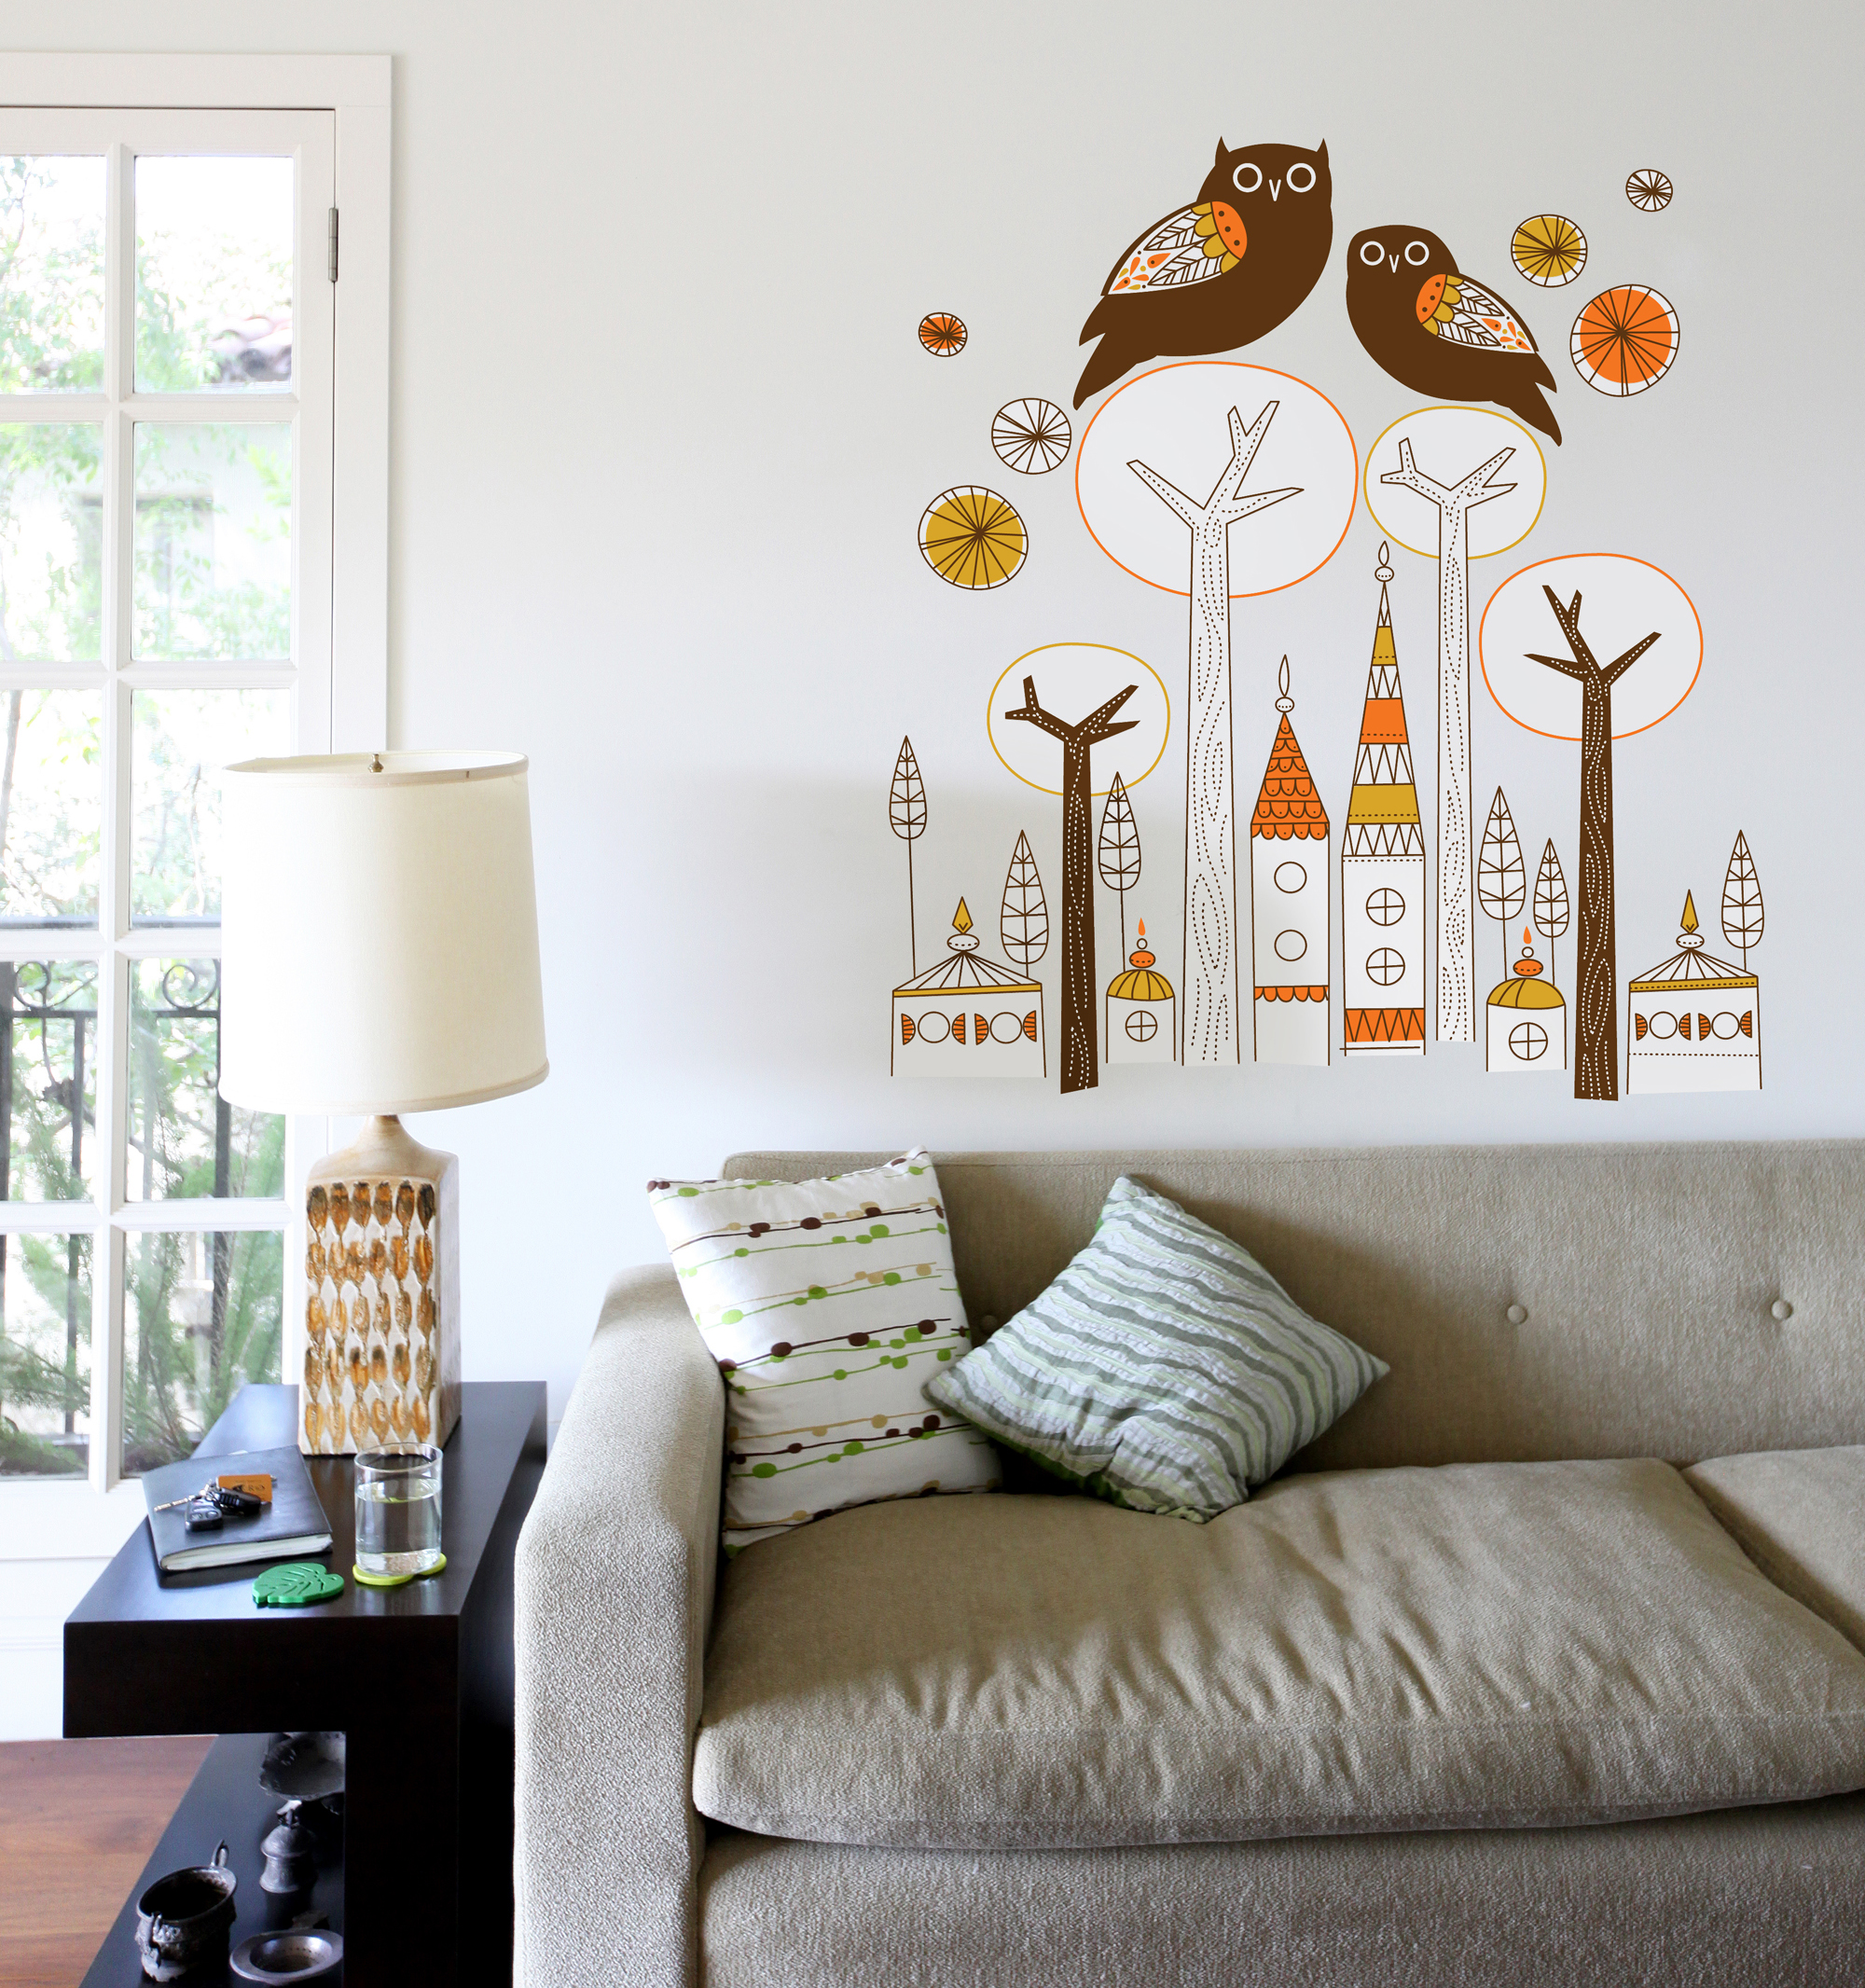 These Amy Ruppel wall stickers launched in the US earlier this year, 